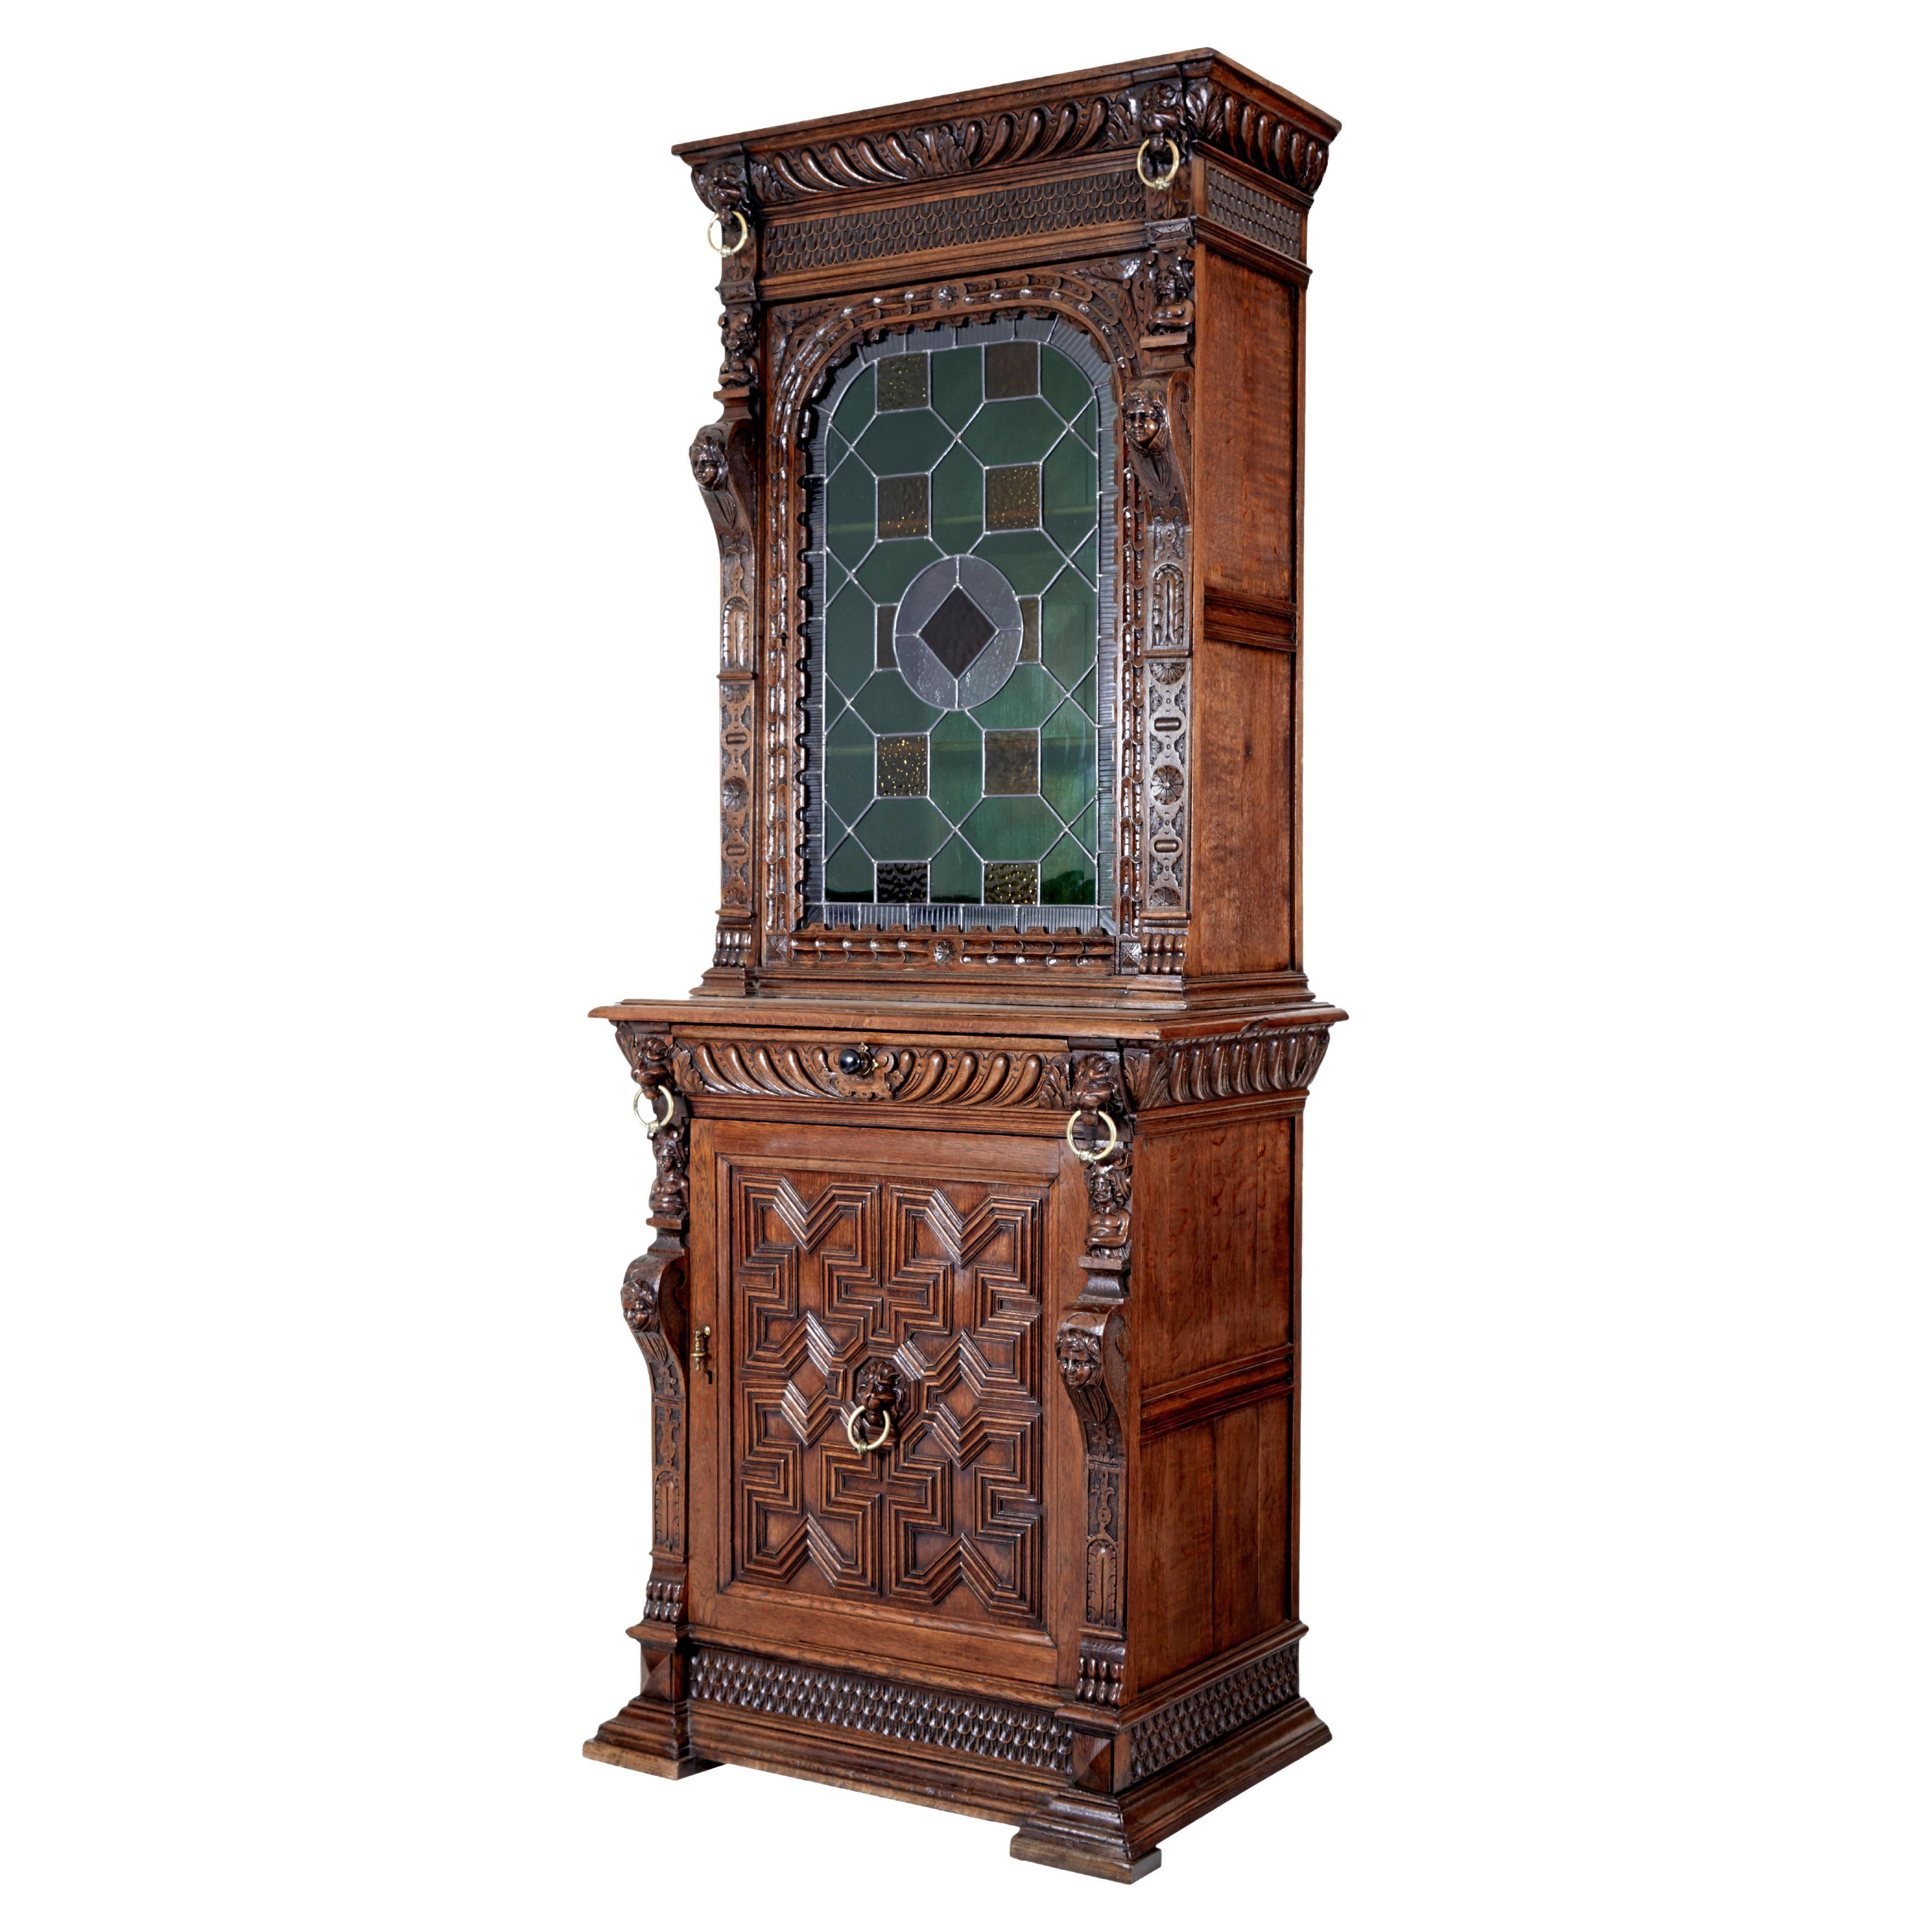 19th century Flemish oak and stain glass cabinet